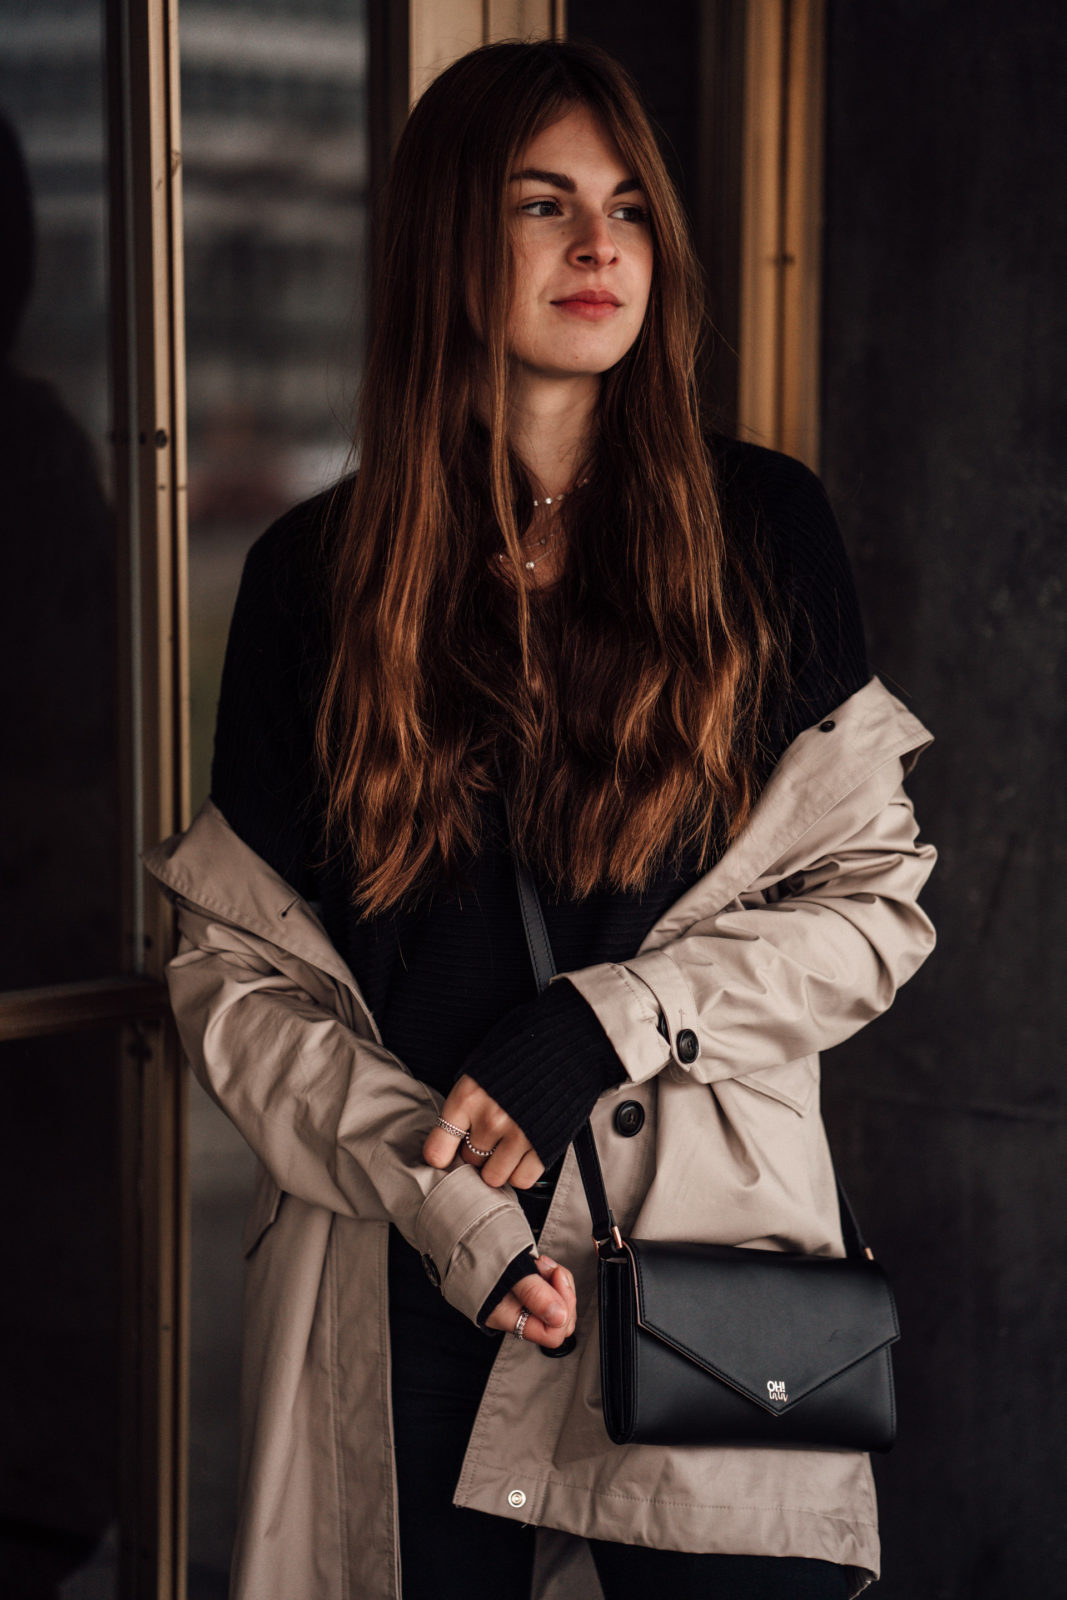 Wearing a trenchcoat in winter? || Fashionblog Berlin || Winter Outfit